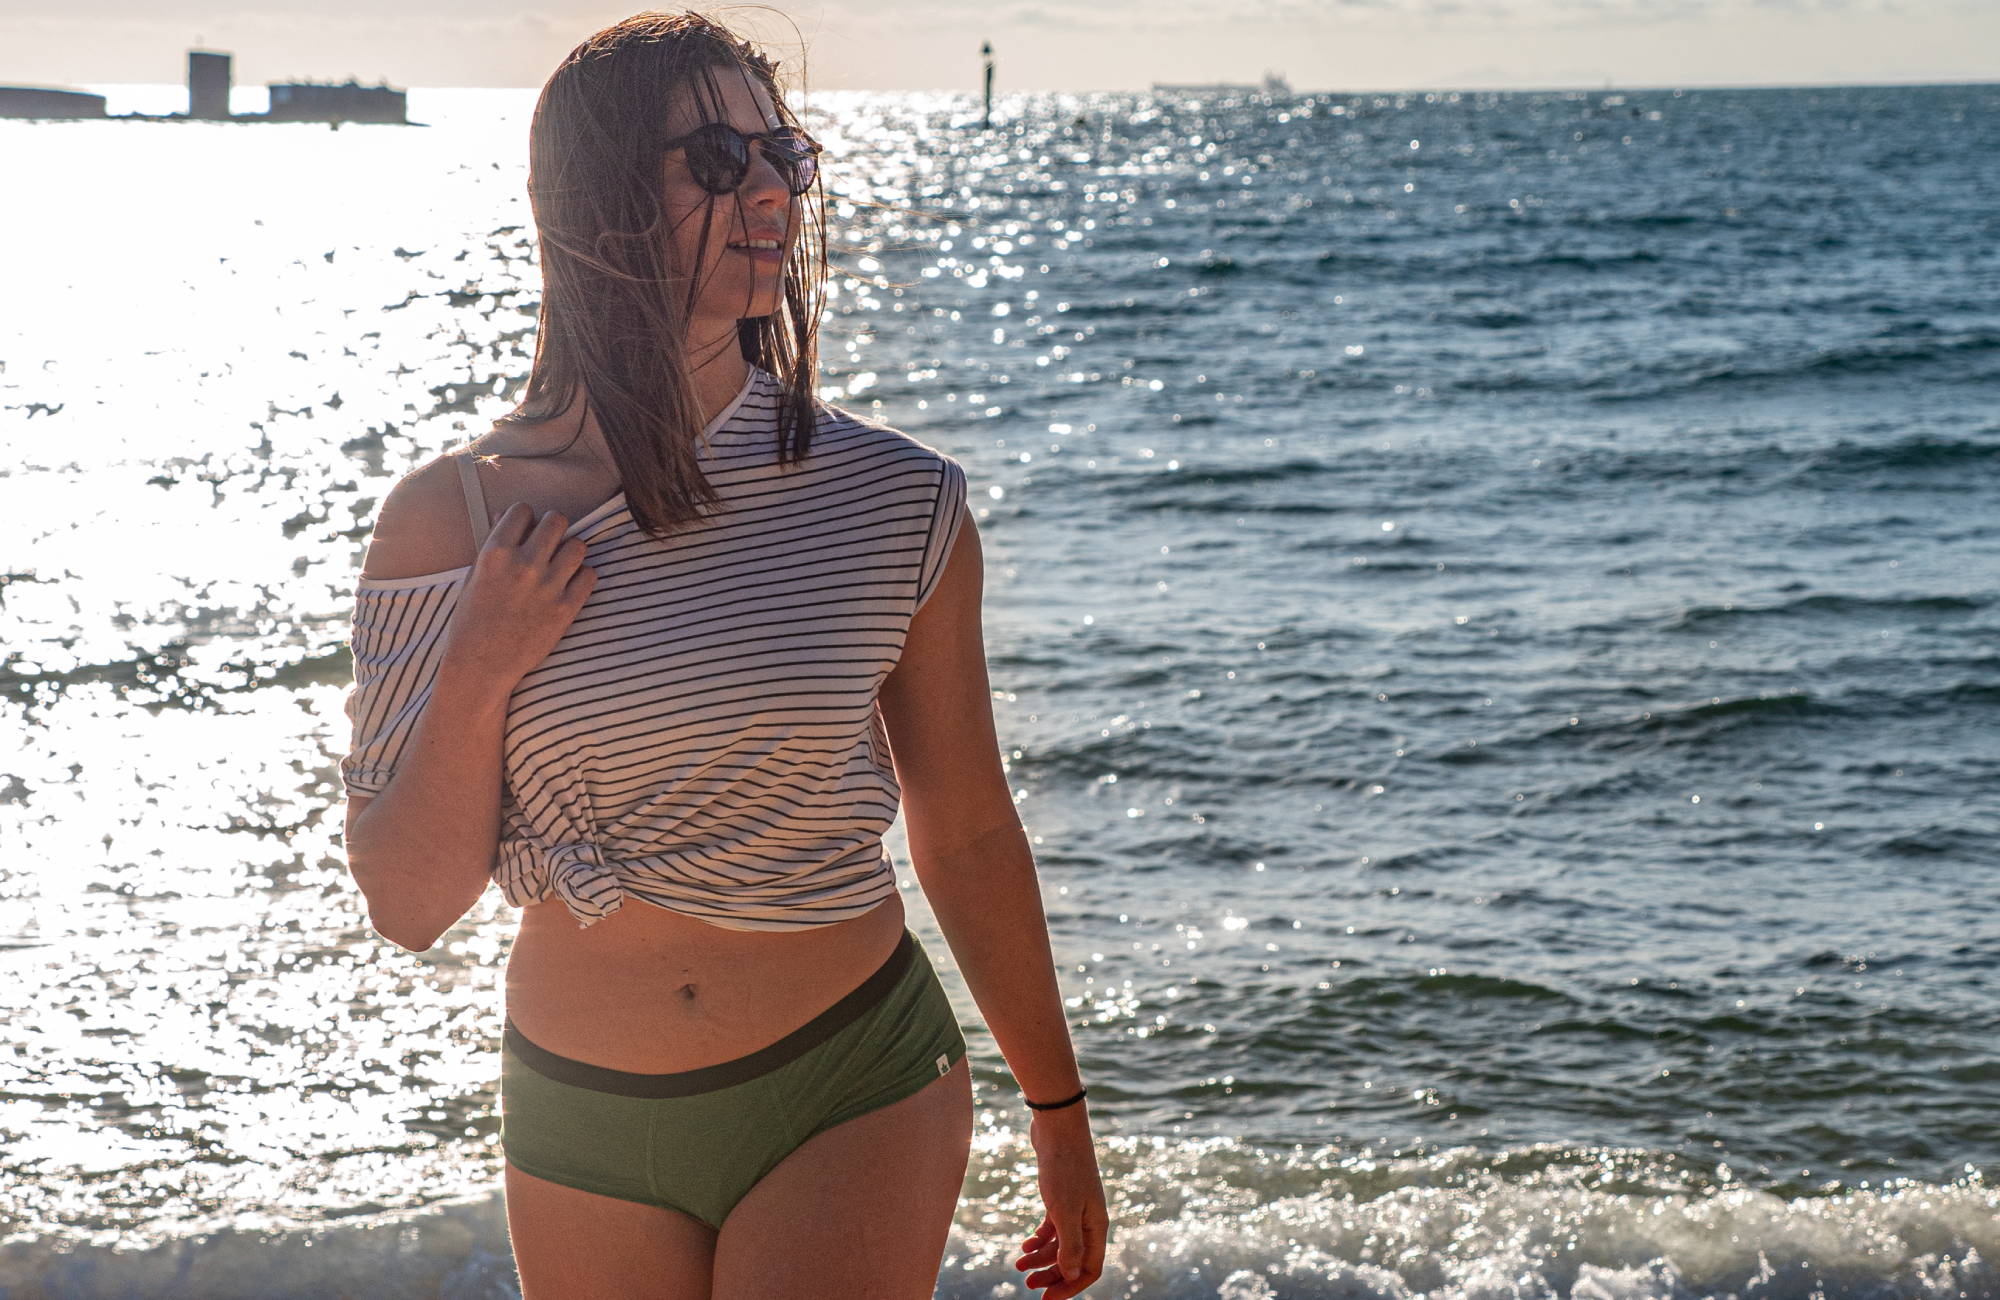 A woman in green underwear, a striped shirt, and sunglasses walking away from the ocean.